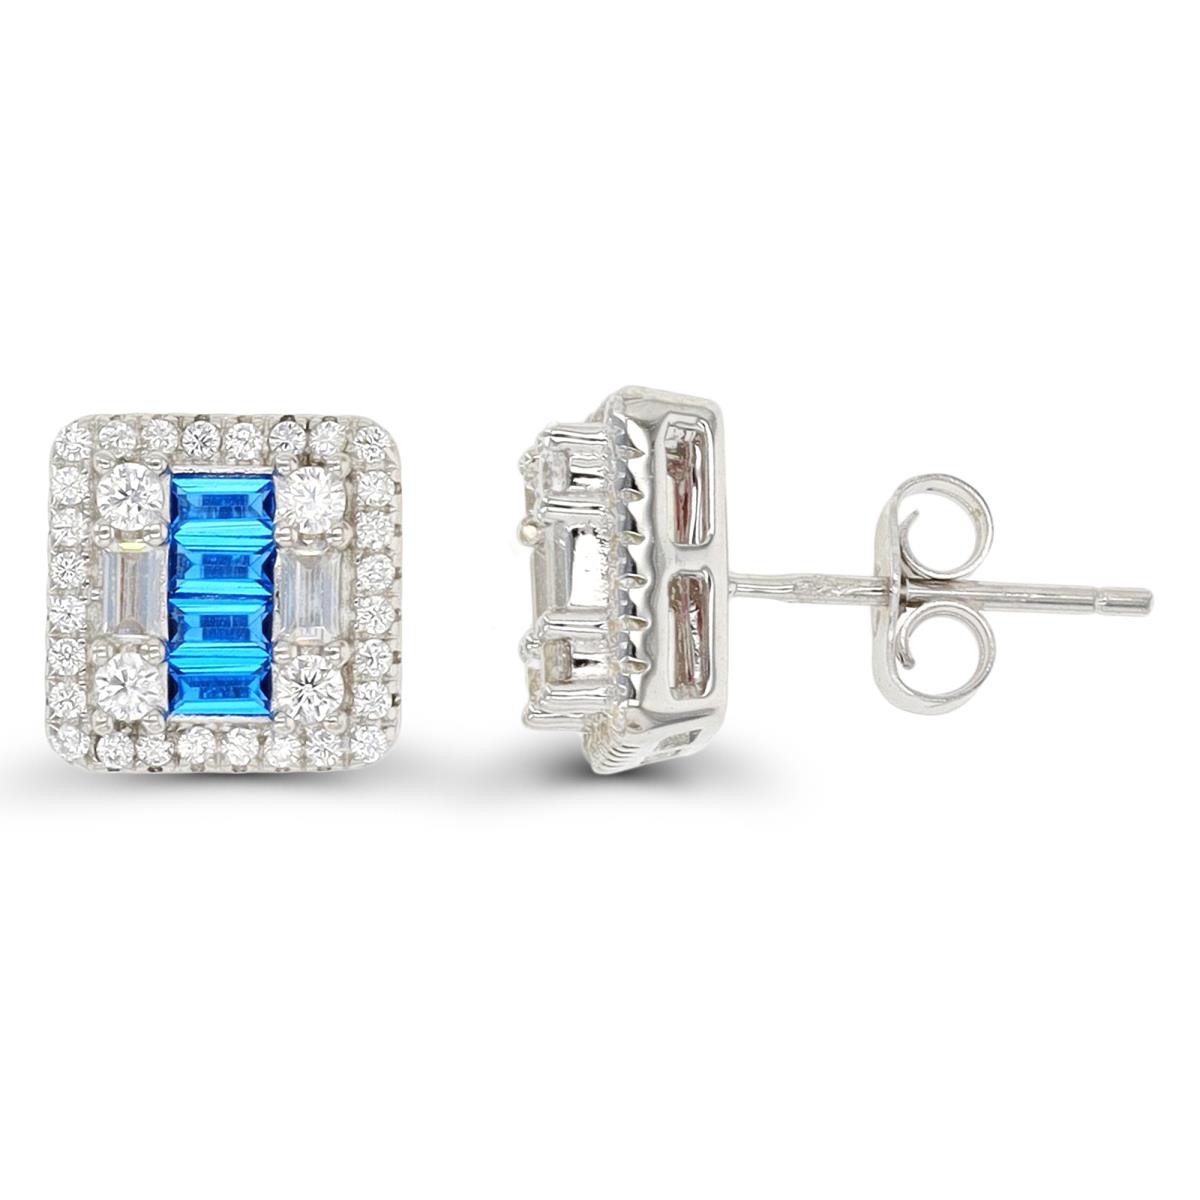 Sterling Silver Rhodium 10x10mm Pave Rd & #113 Blue Baguette CZ Square Stud Earring